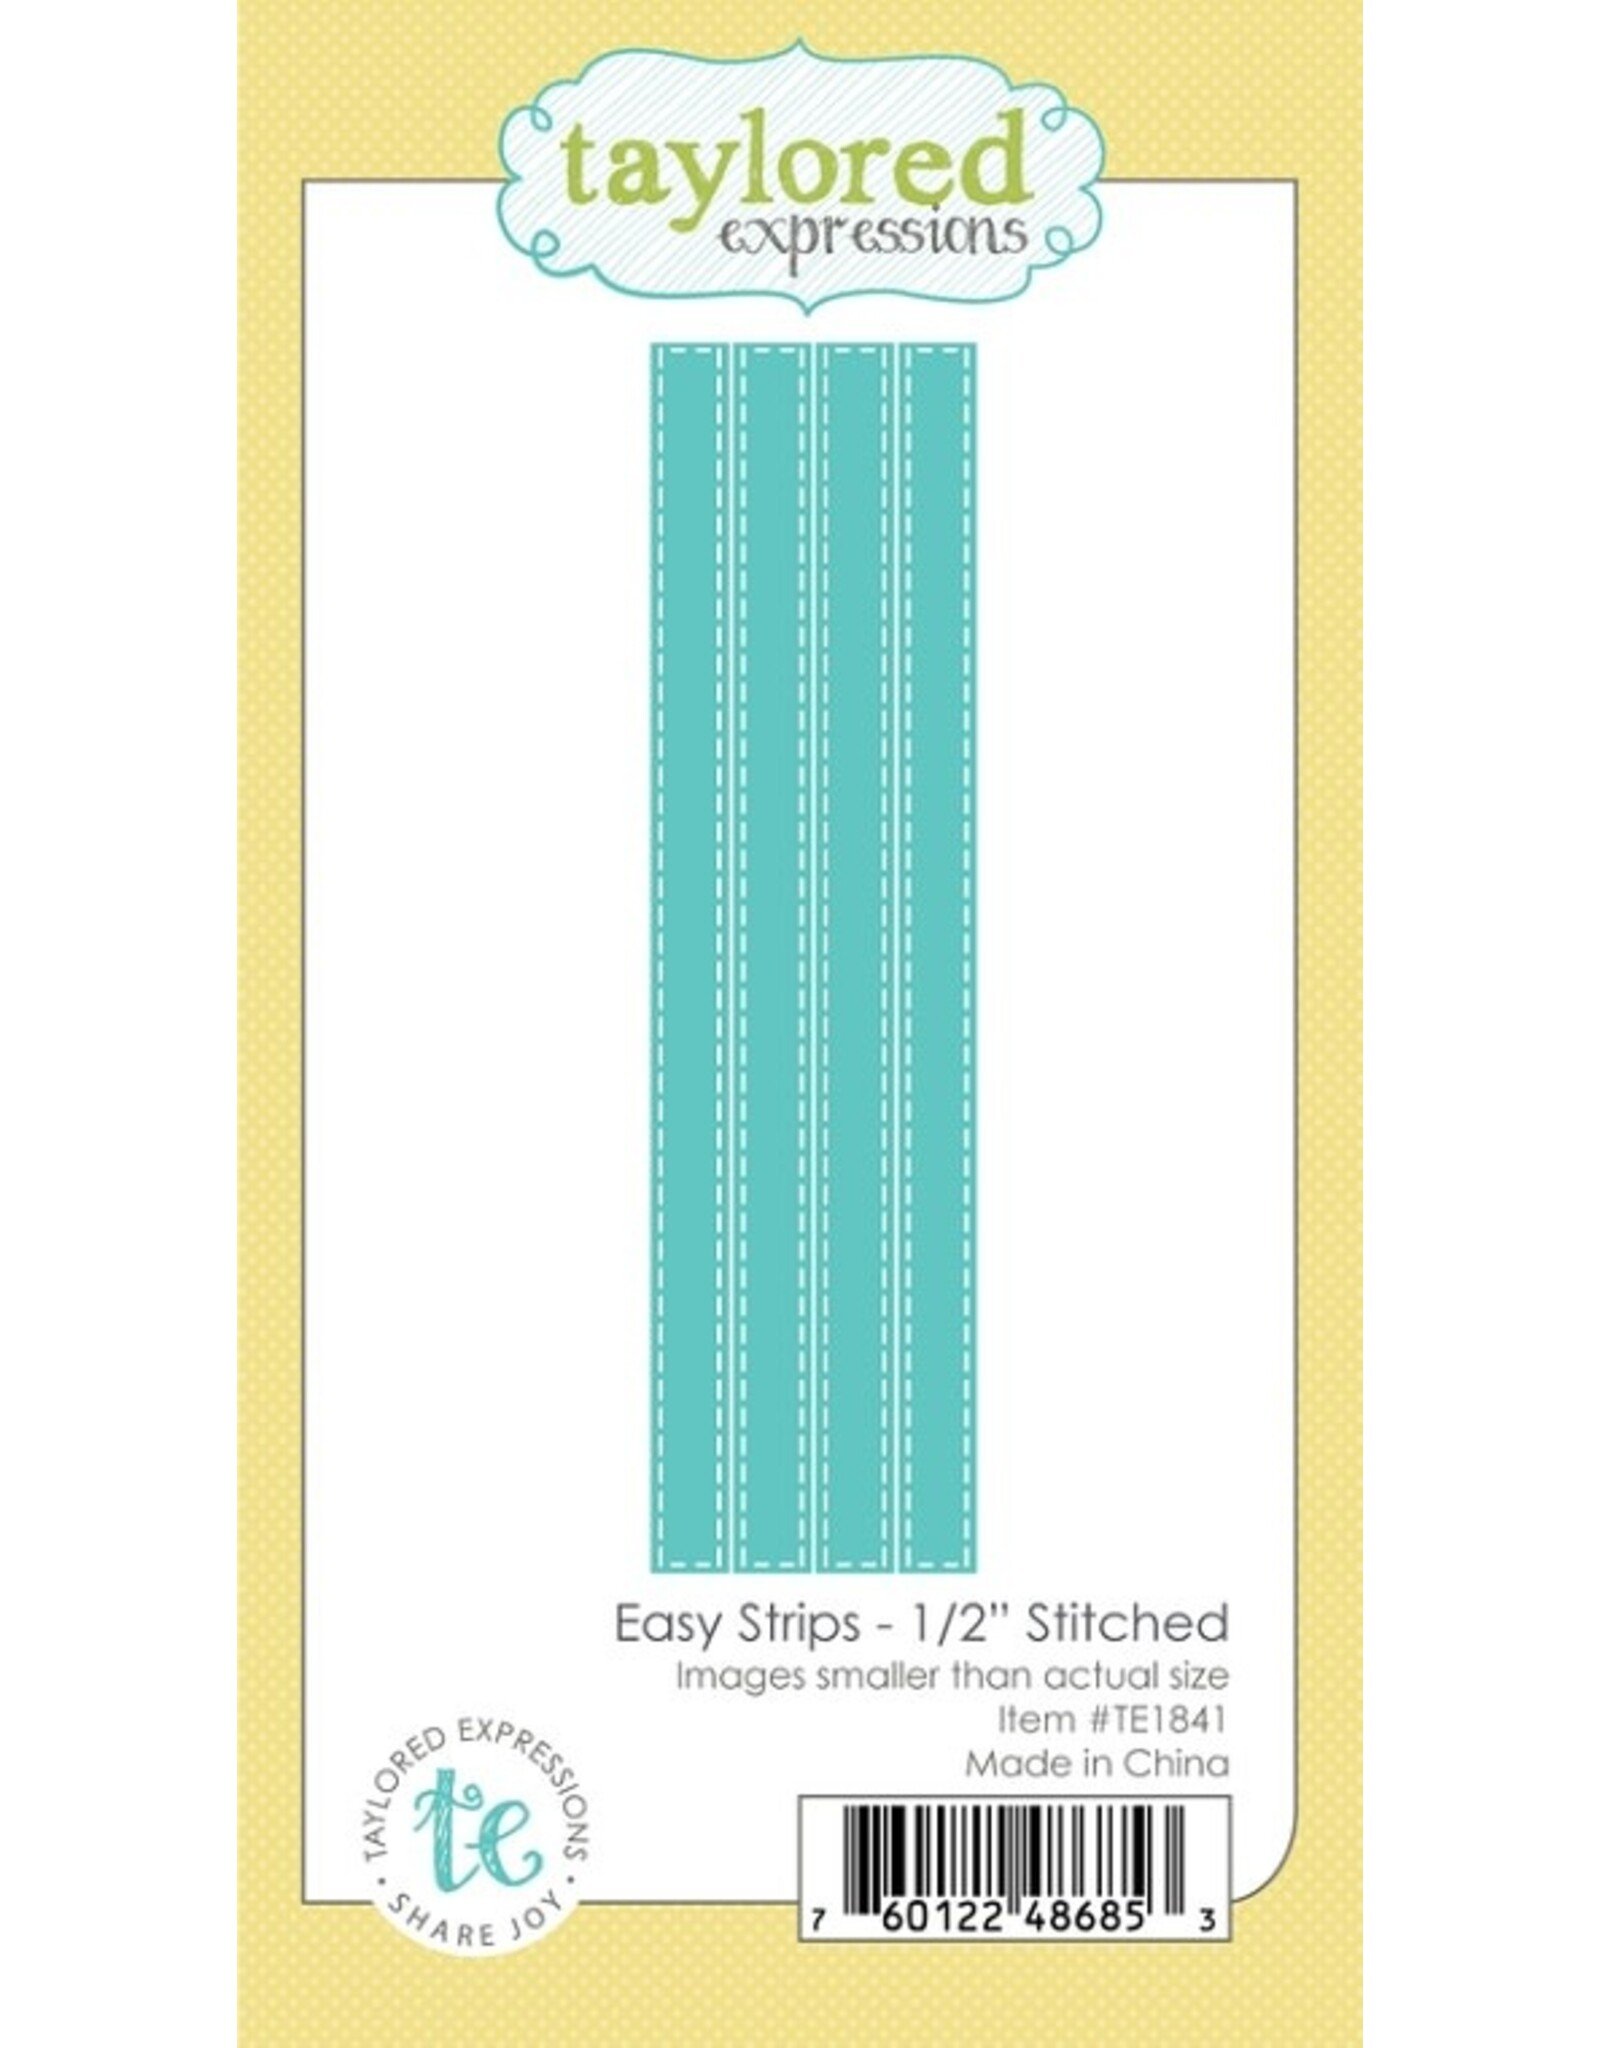 Taylored Expressions Easy Strips - 1/2" Stitched